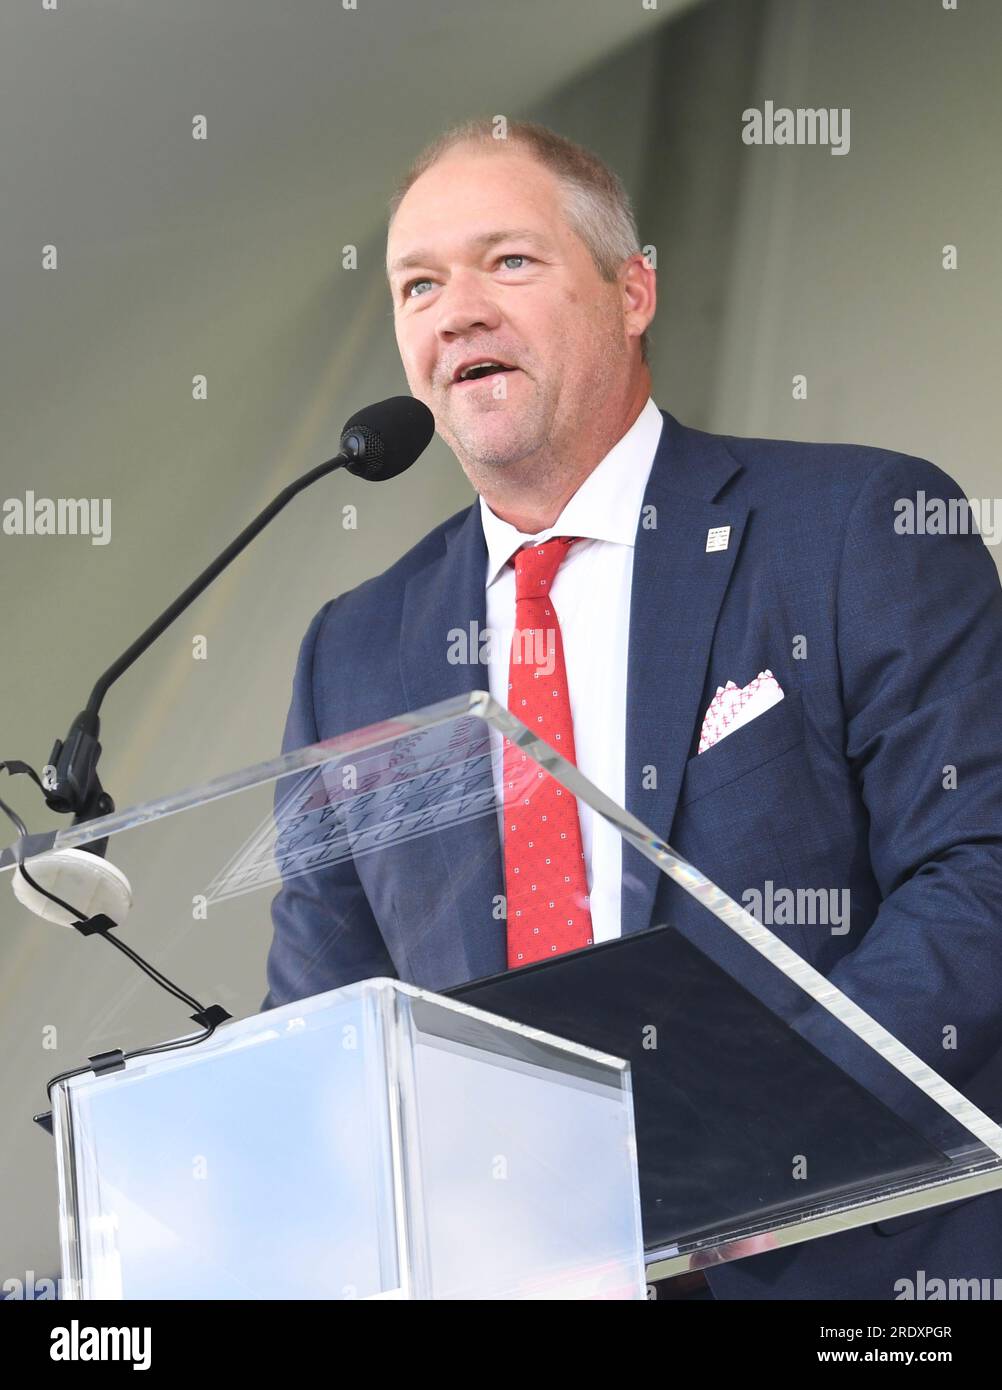 Cooperstown, United States. 23rd July, 2023. National Baseball Hall of Fame's newest member Scott Rolen speaks at the Major League Baseball's Hall Of Fame induction Ceremony for 2023 inductees in Cooperstown, New York on Sunday, July 23, 2023. Scott Rolen and Fred McGriff were the two players inducted into the National Baseball Hall of Fame class of 2023. Photo by George Napolitano/UPI Credit: UPI/Alamy Live News Stock Photo